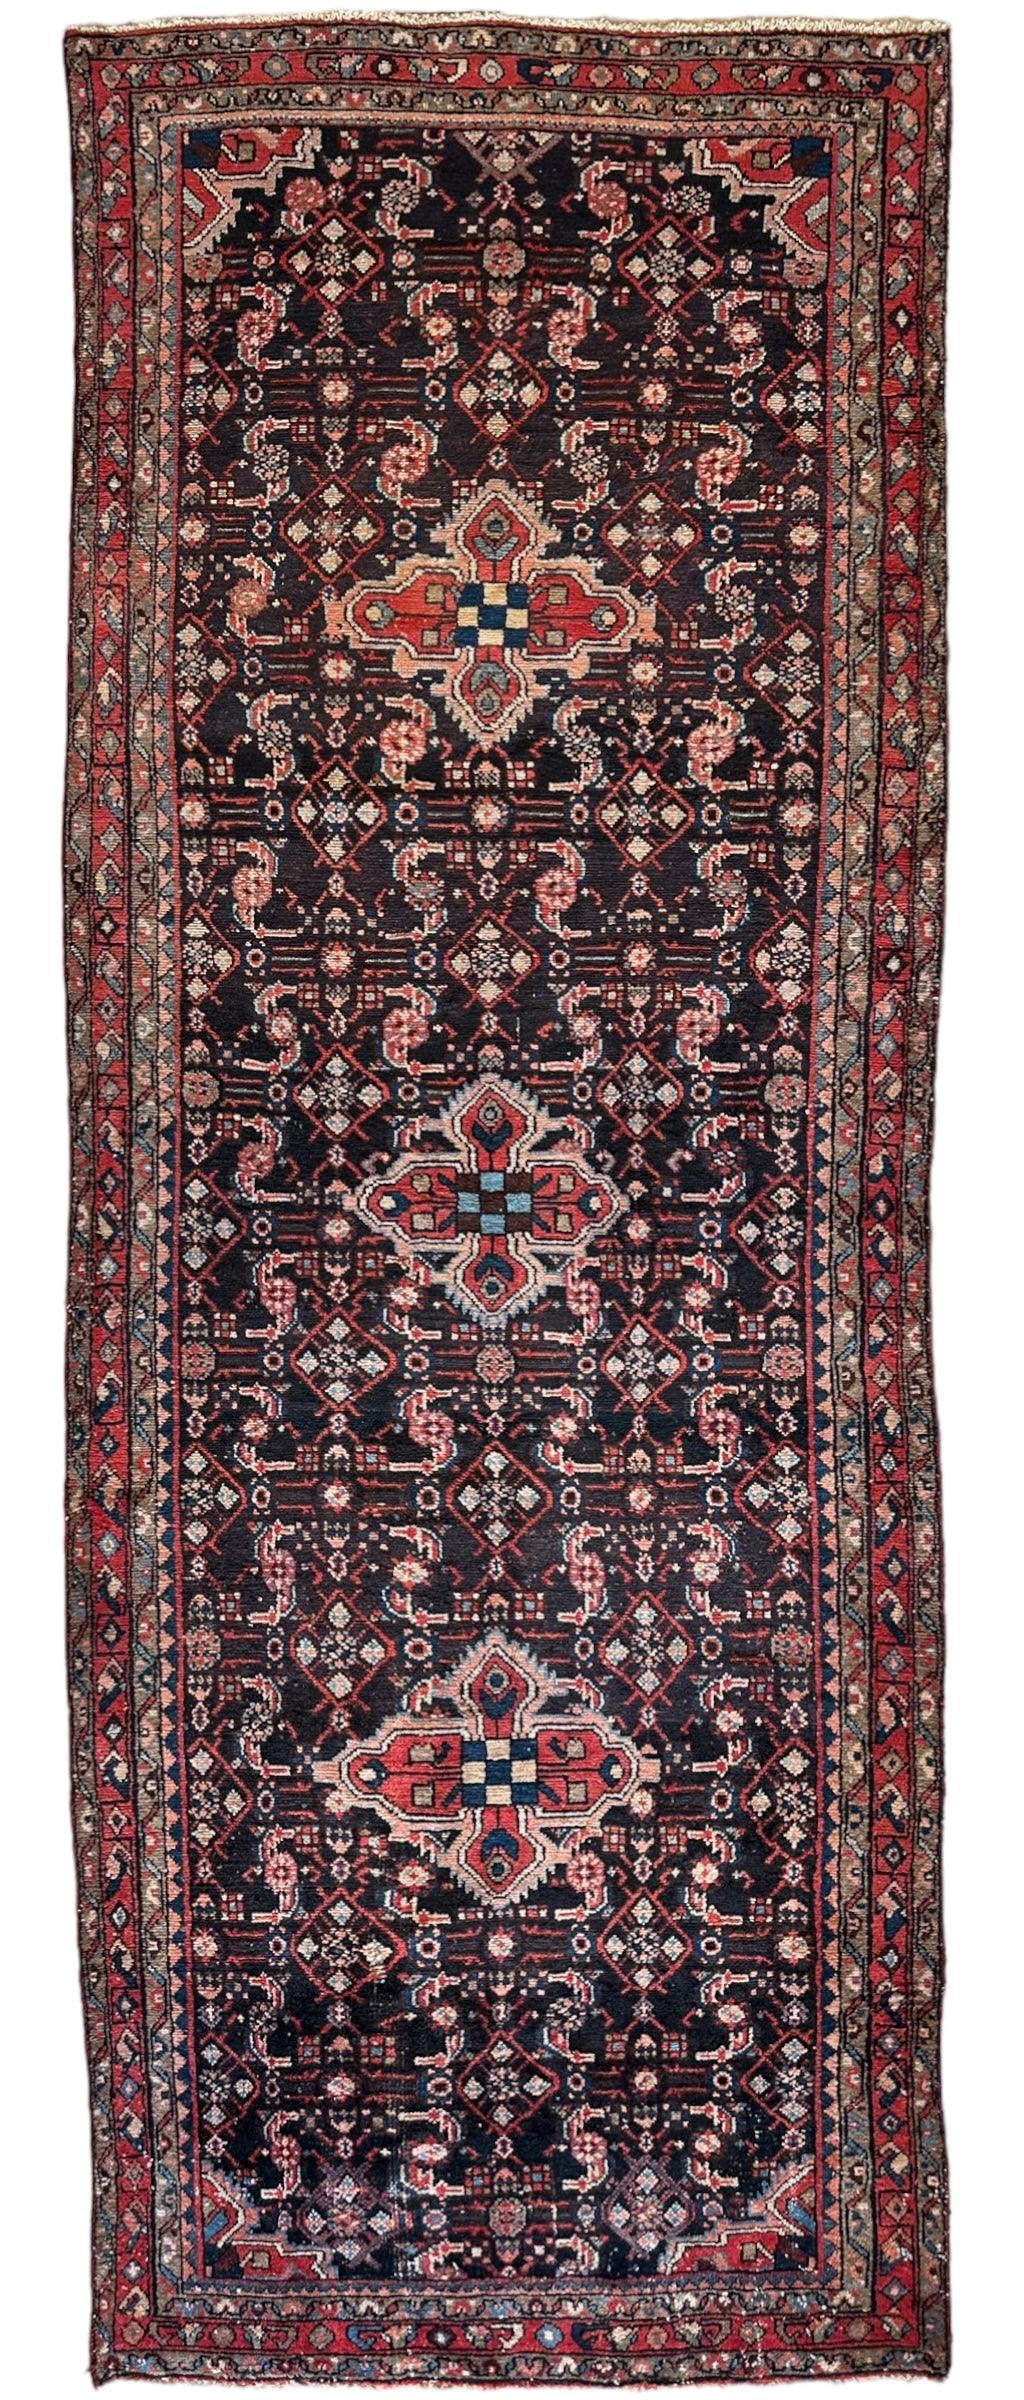 Hand-Knotted Persian Hamadan Wide Runner Rug 4’ x 10’6”